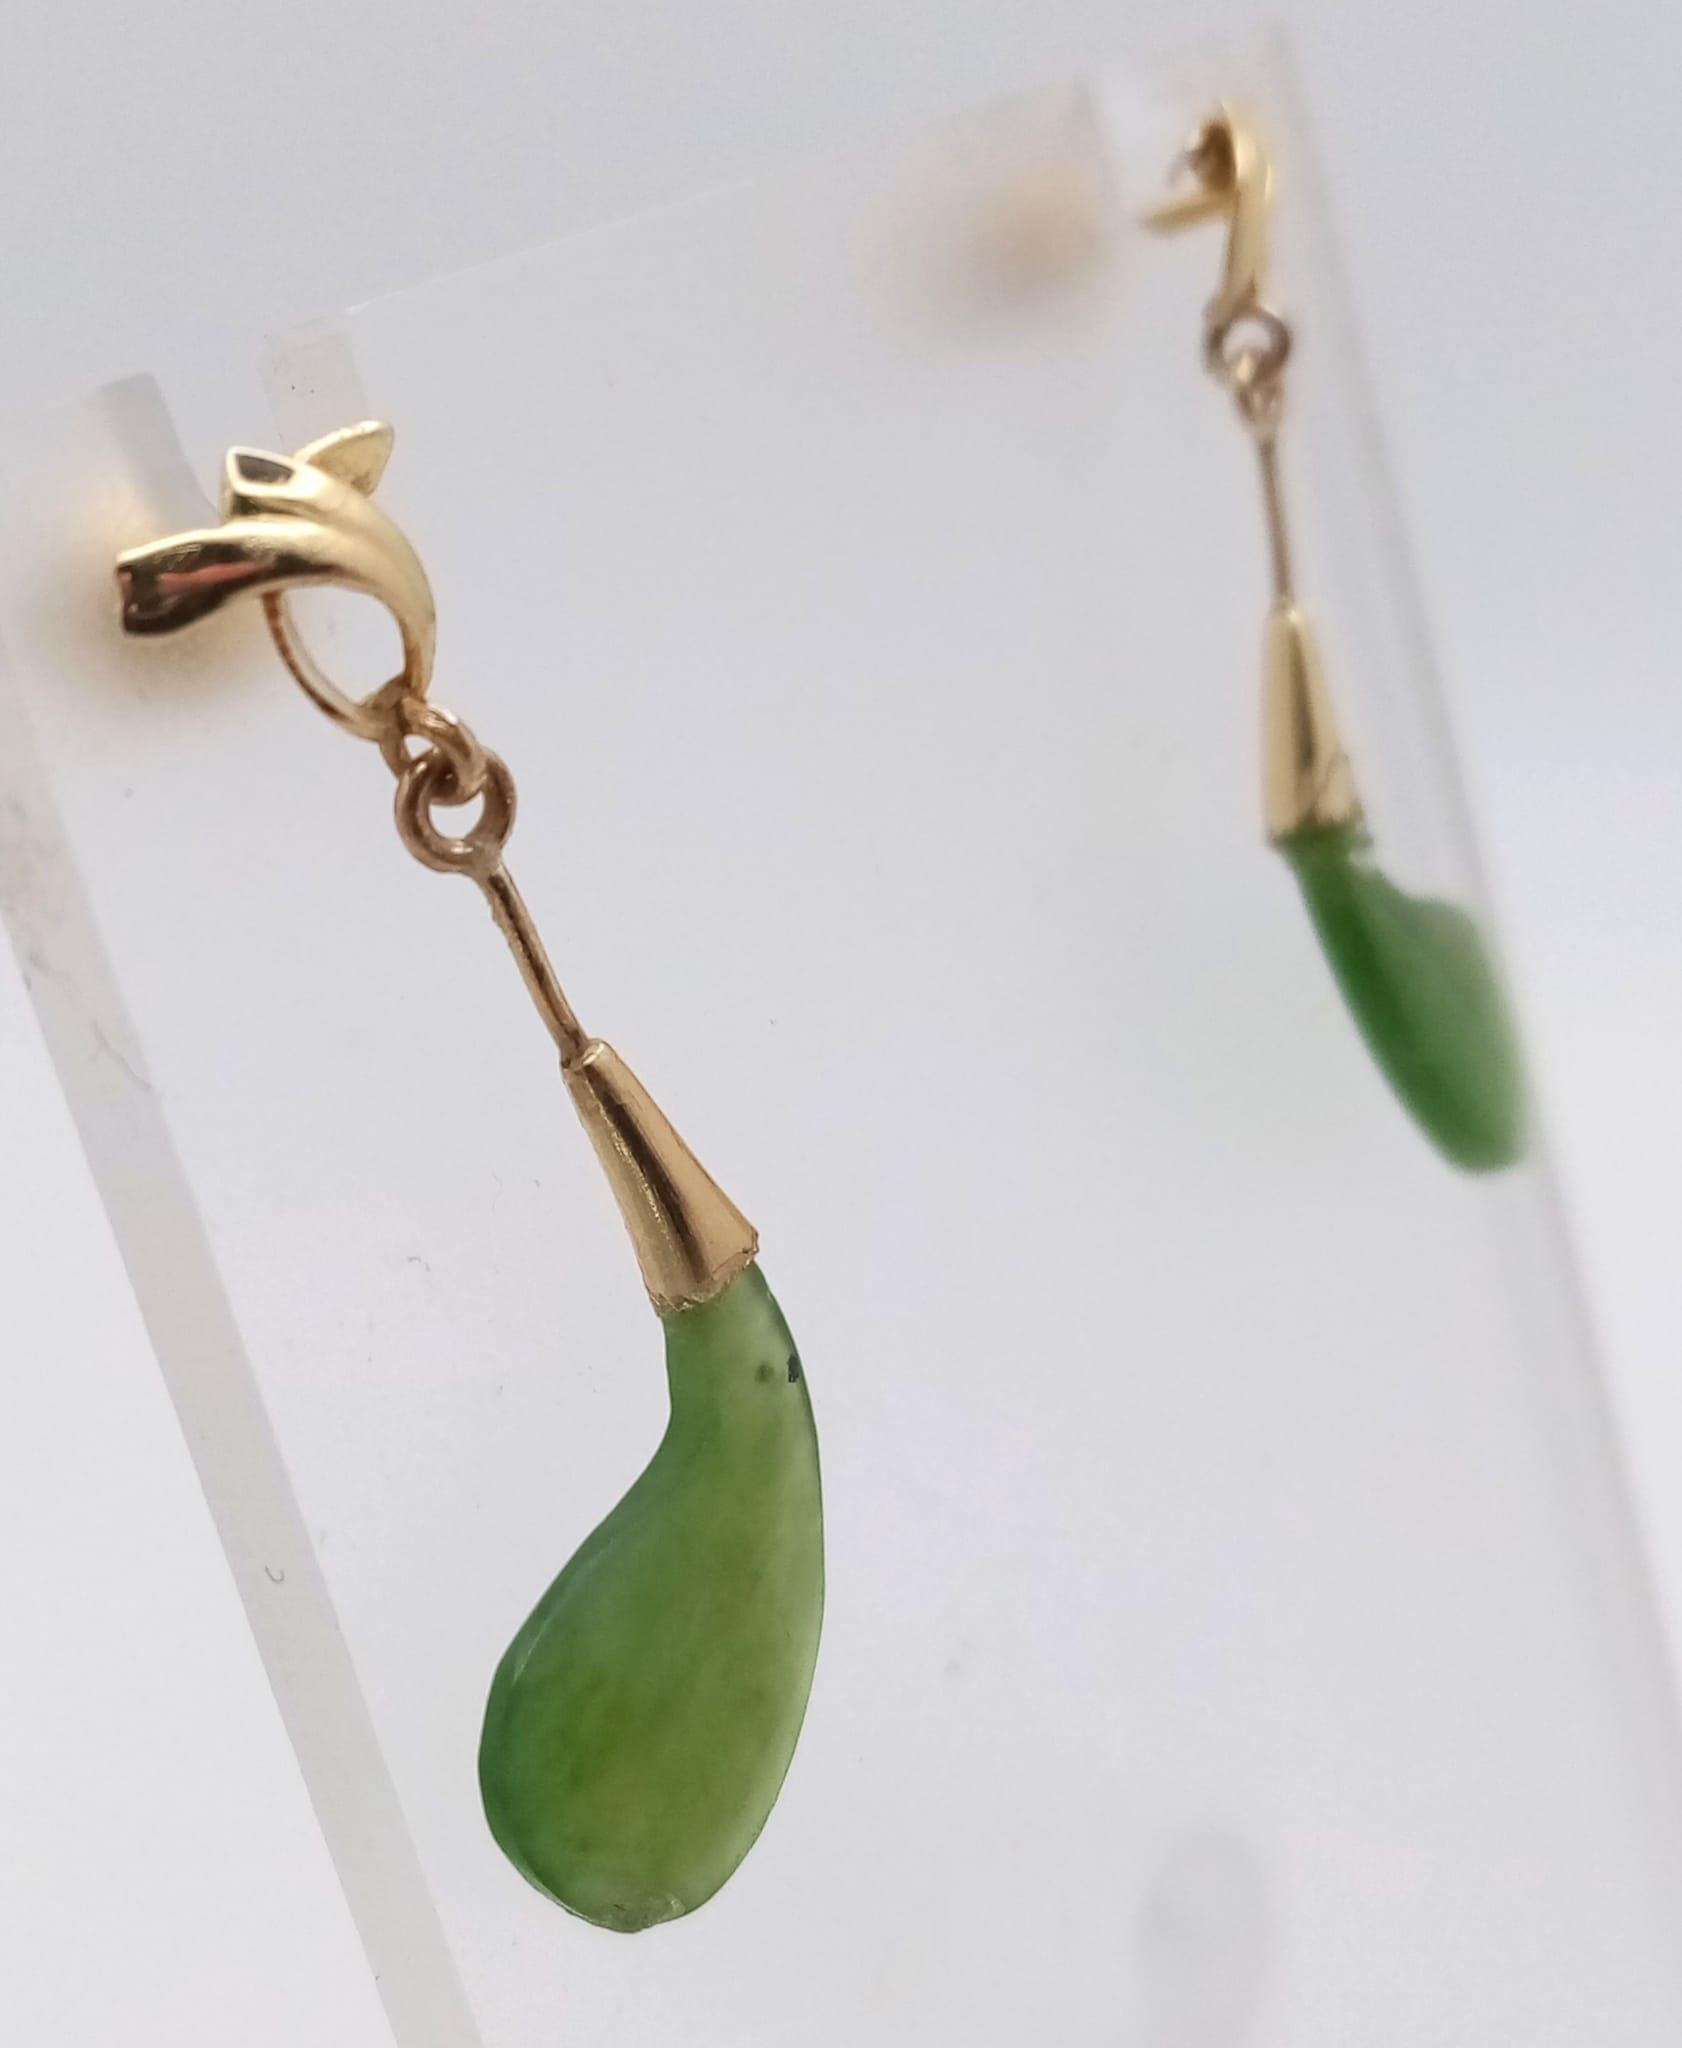 A Pair of 14K Yellow Gold and Jade Earrings. 2.4g total weight. - Image 3 of 5